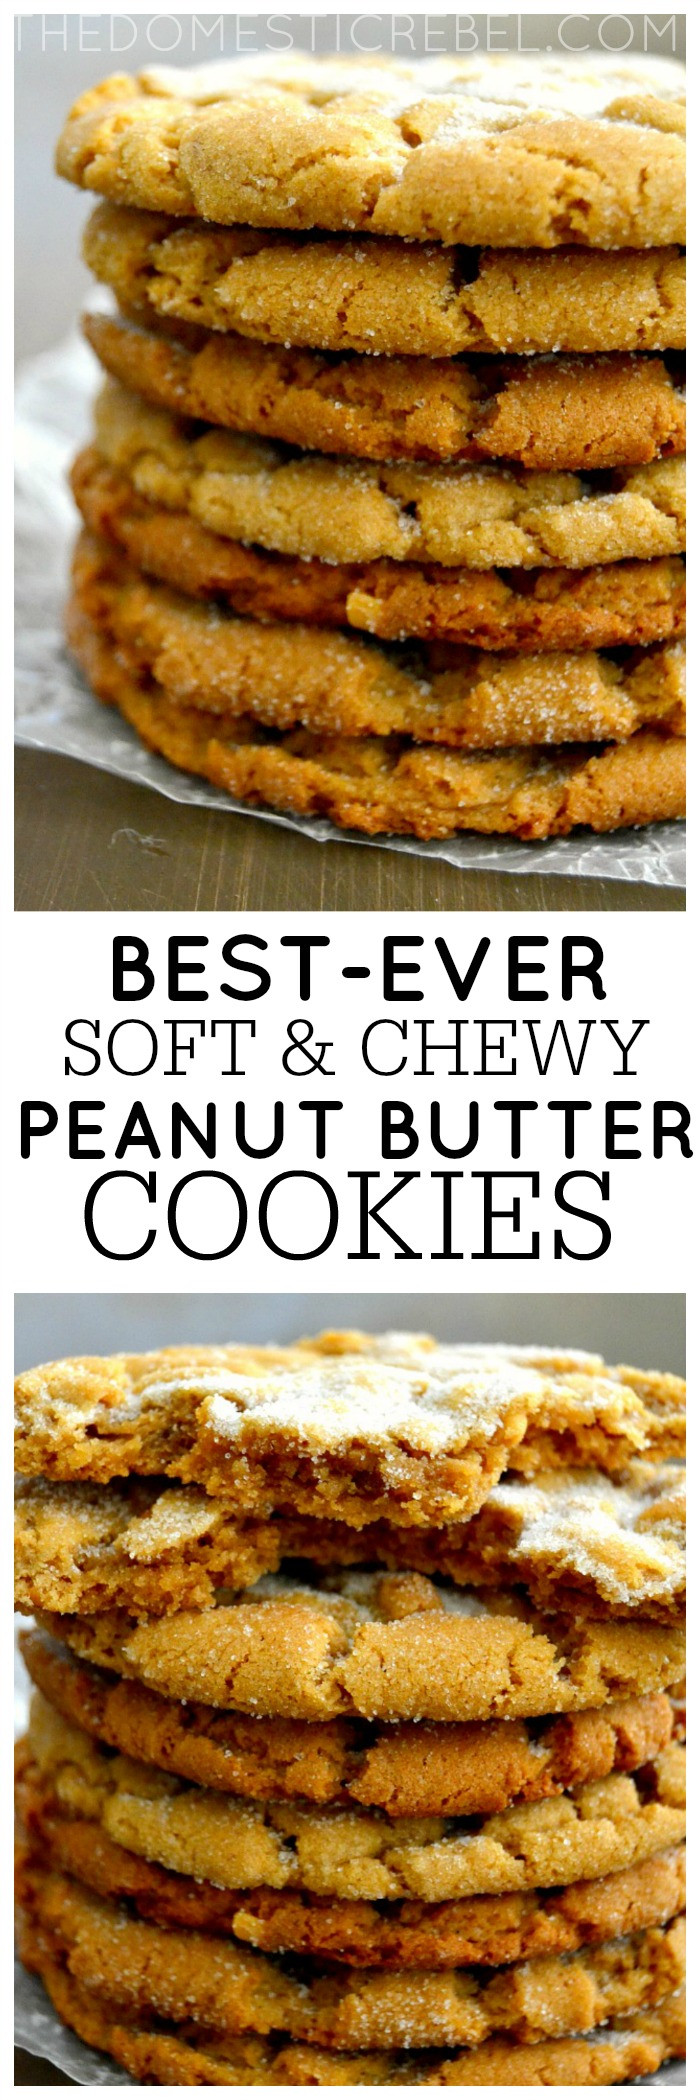 Best Chewy Peanut Butter Cookies
 The Best Crisp and Chewy Peanut Butter Cookies Gluten